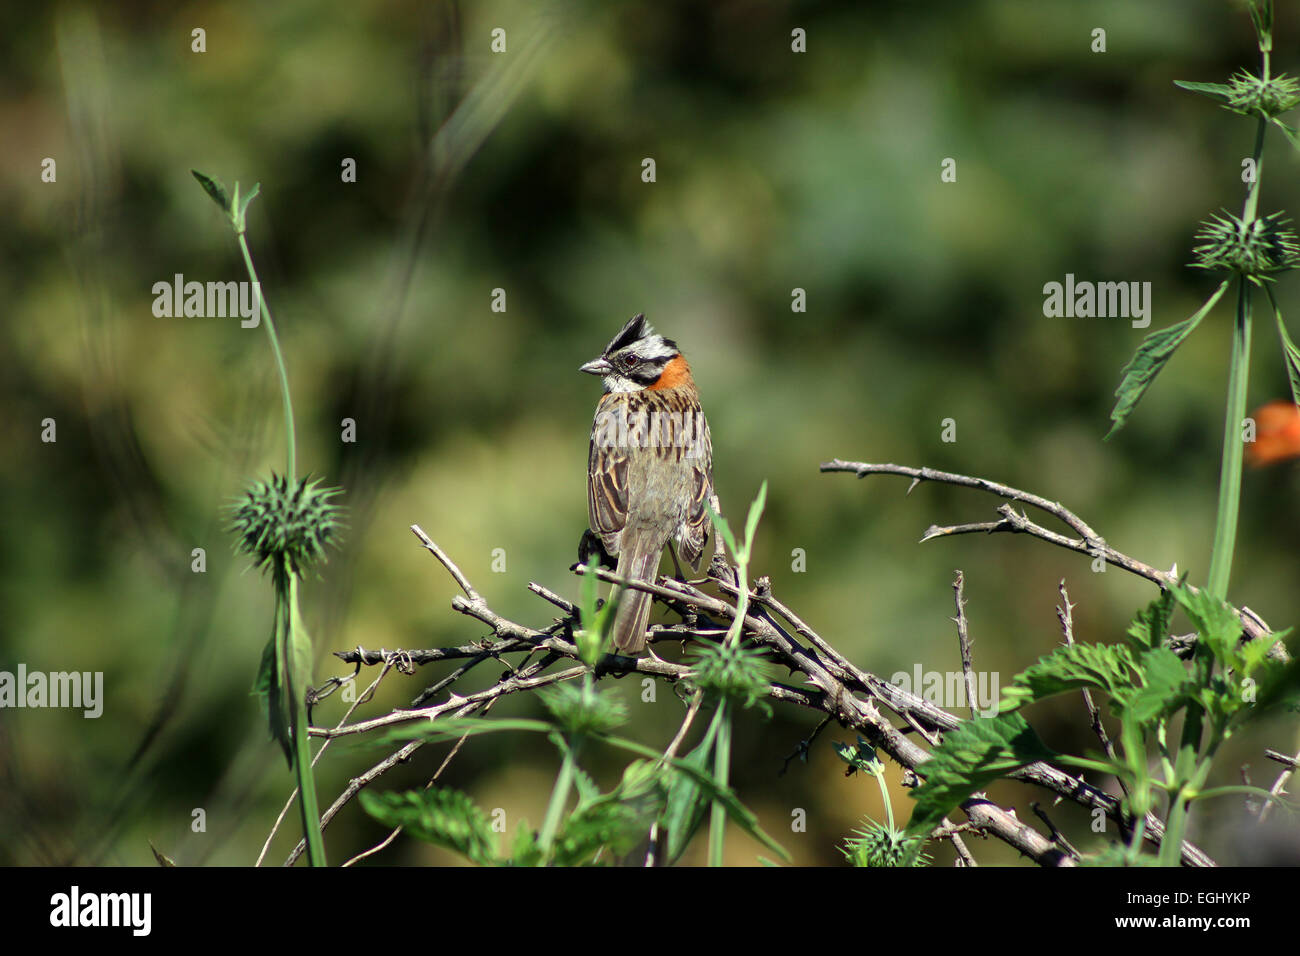 A Rufous Collared Sparrow perched on the branch of a tree in Cotacachi, Ecuador Stock Photo